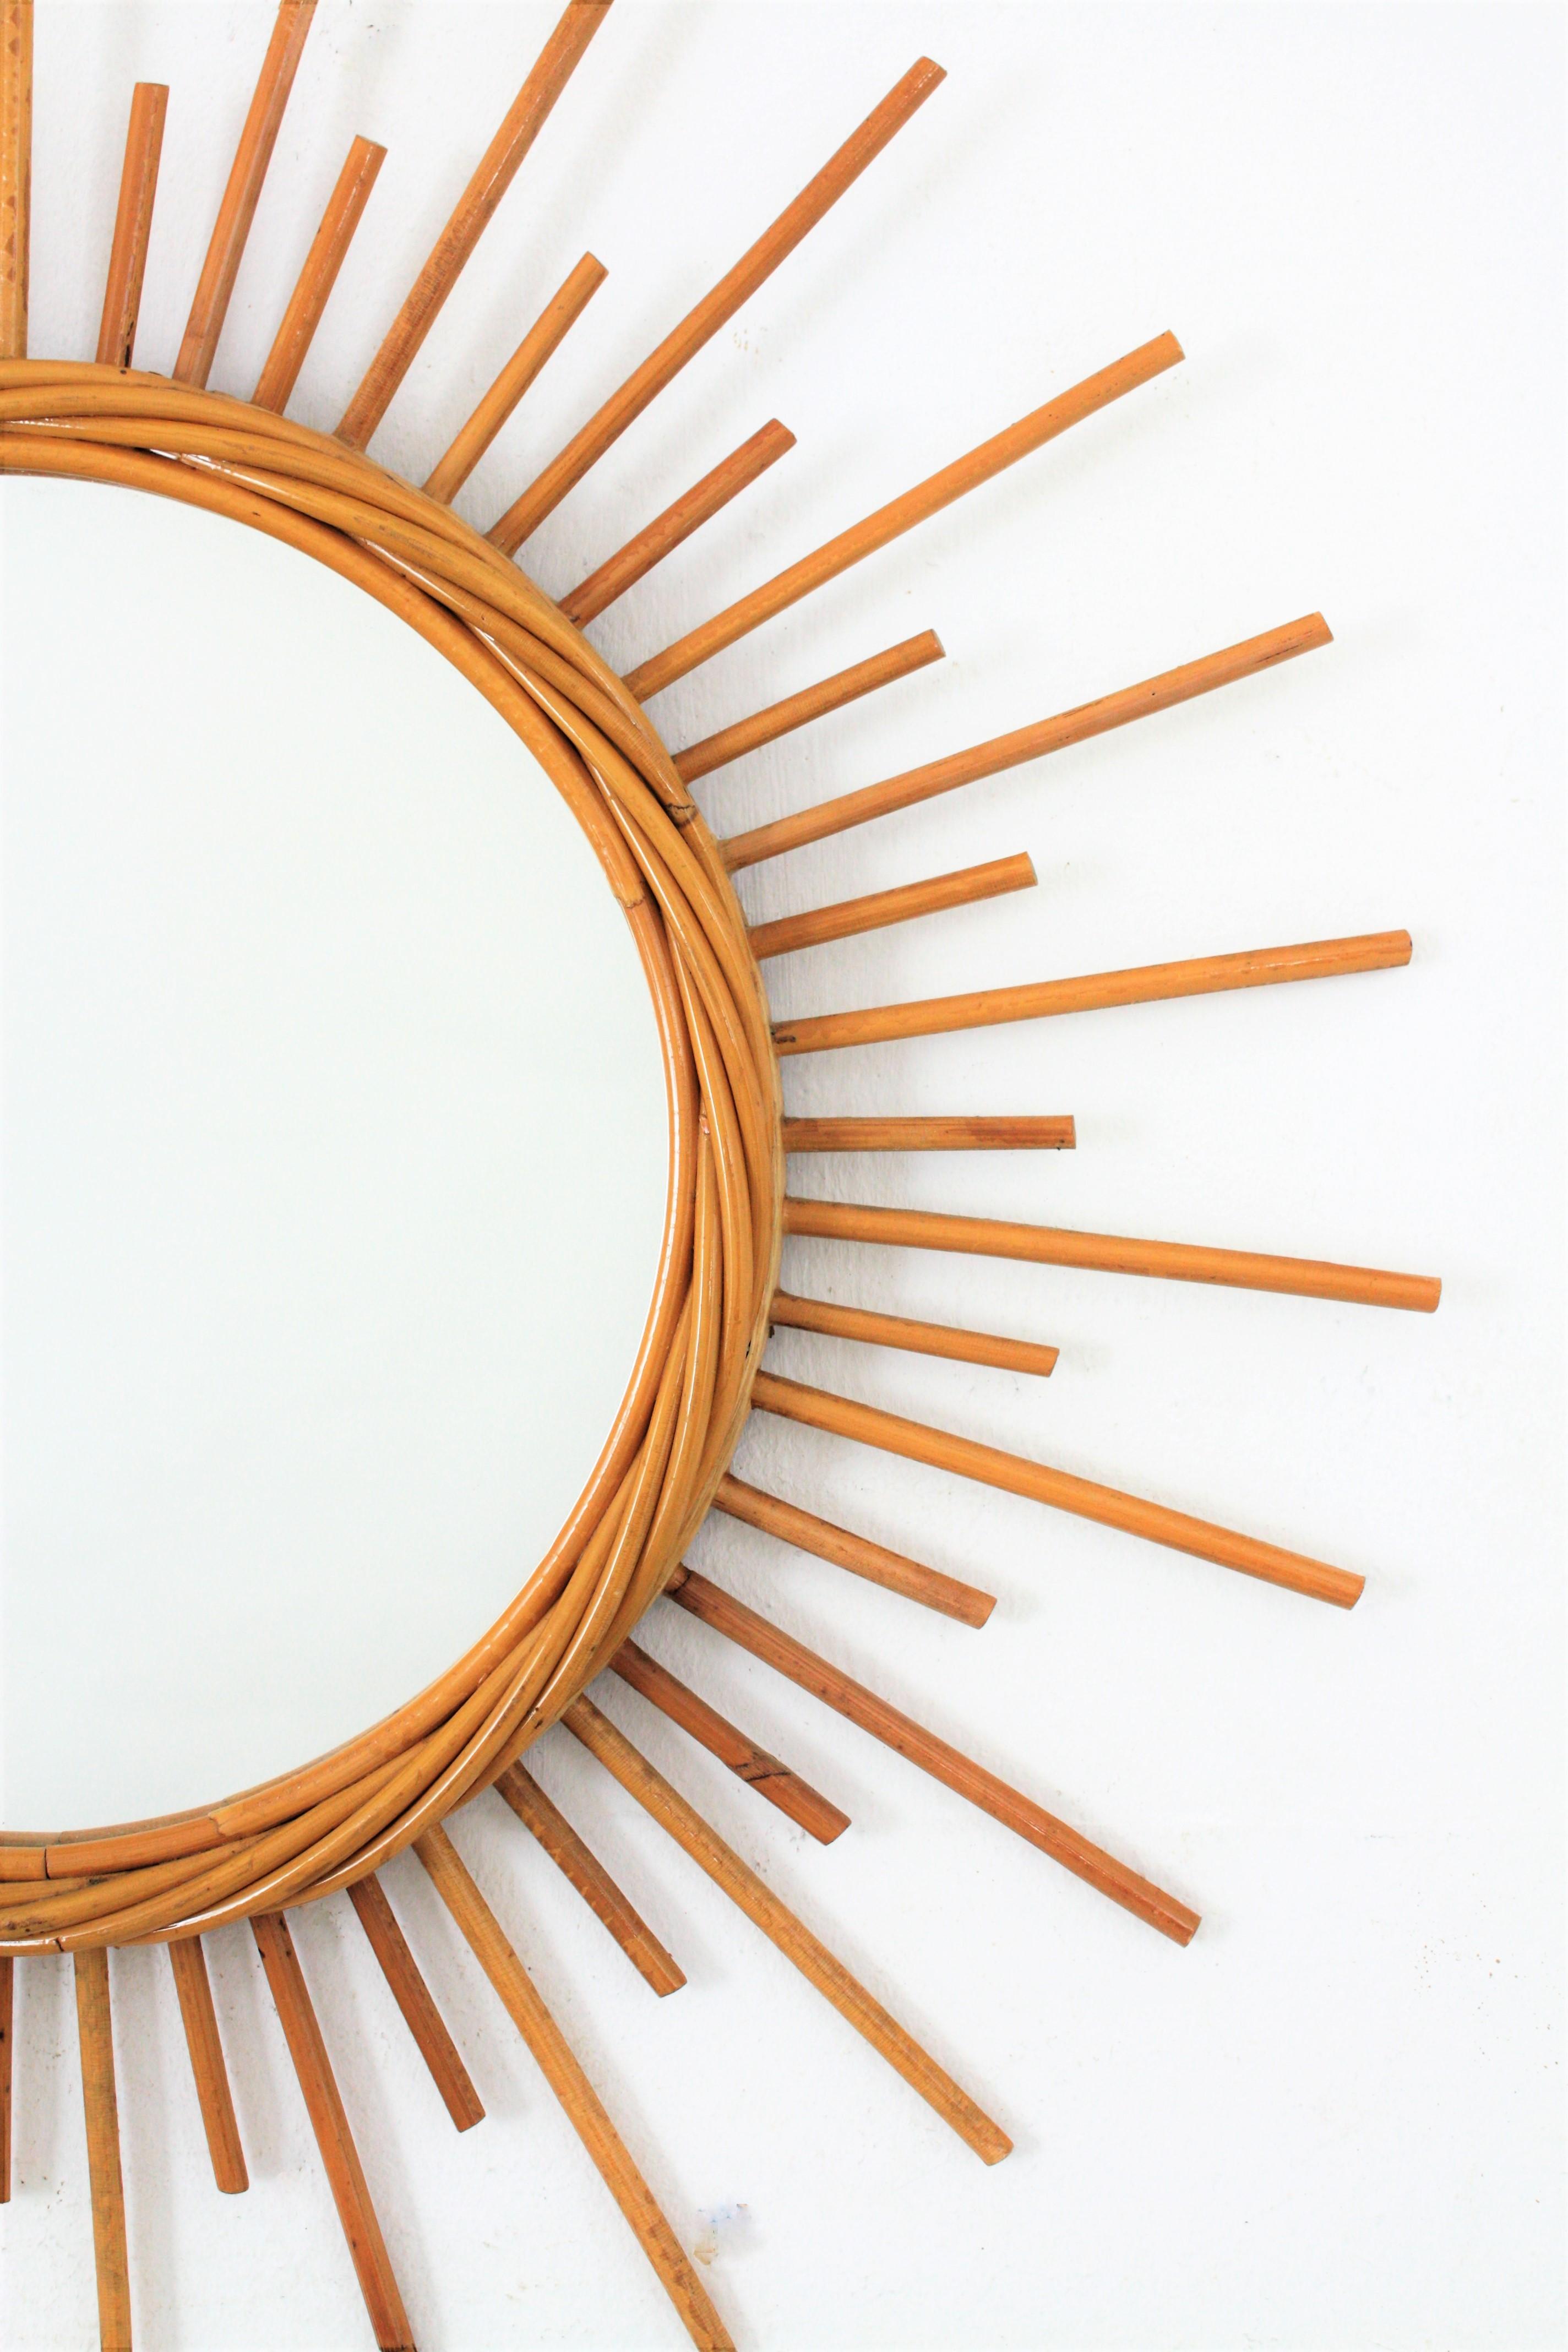 Rattan Sunburst Mirror from the French Riviera, 1960s For Sale 1